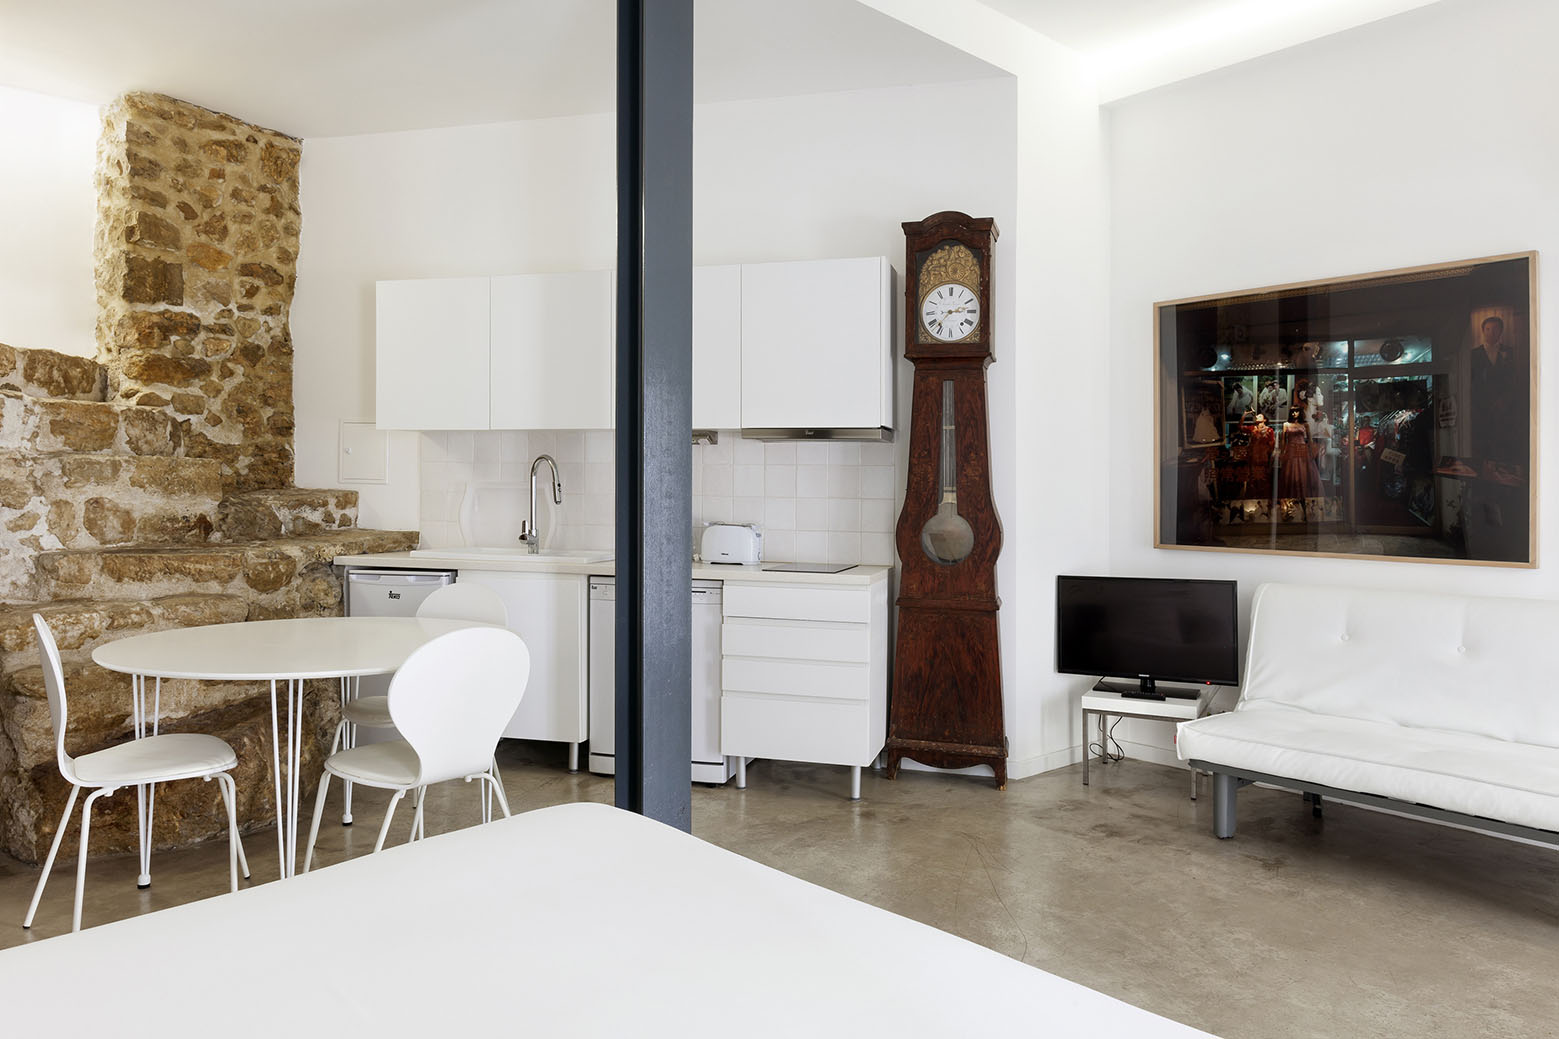 Studio Apartment with Stone Wall